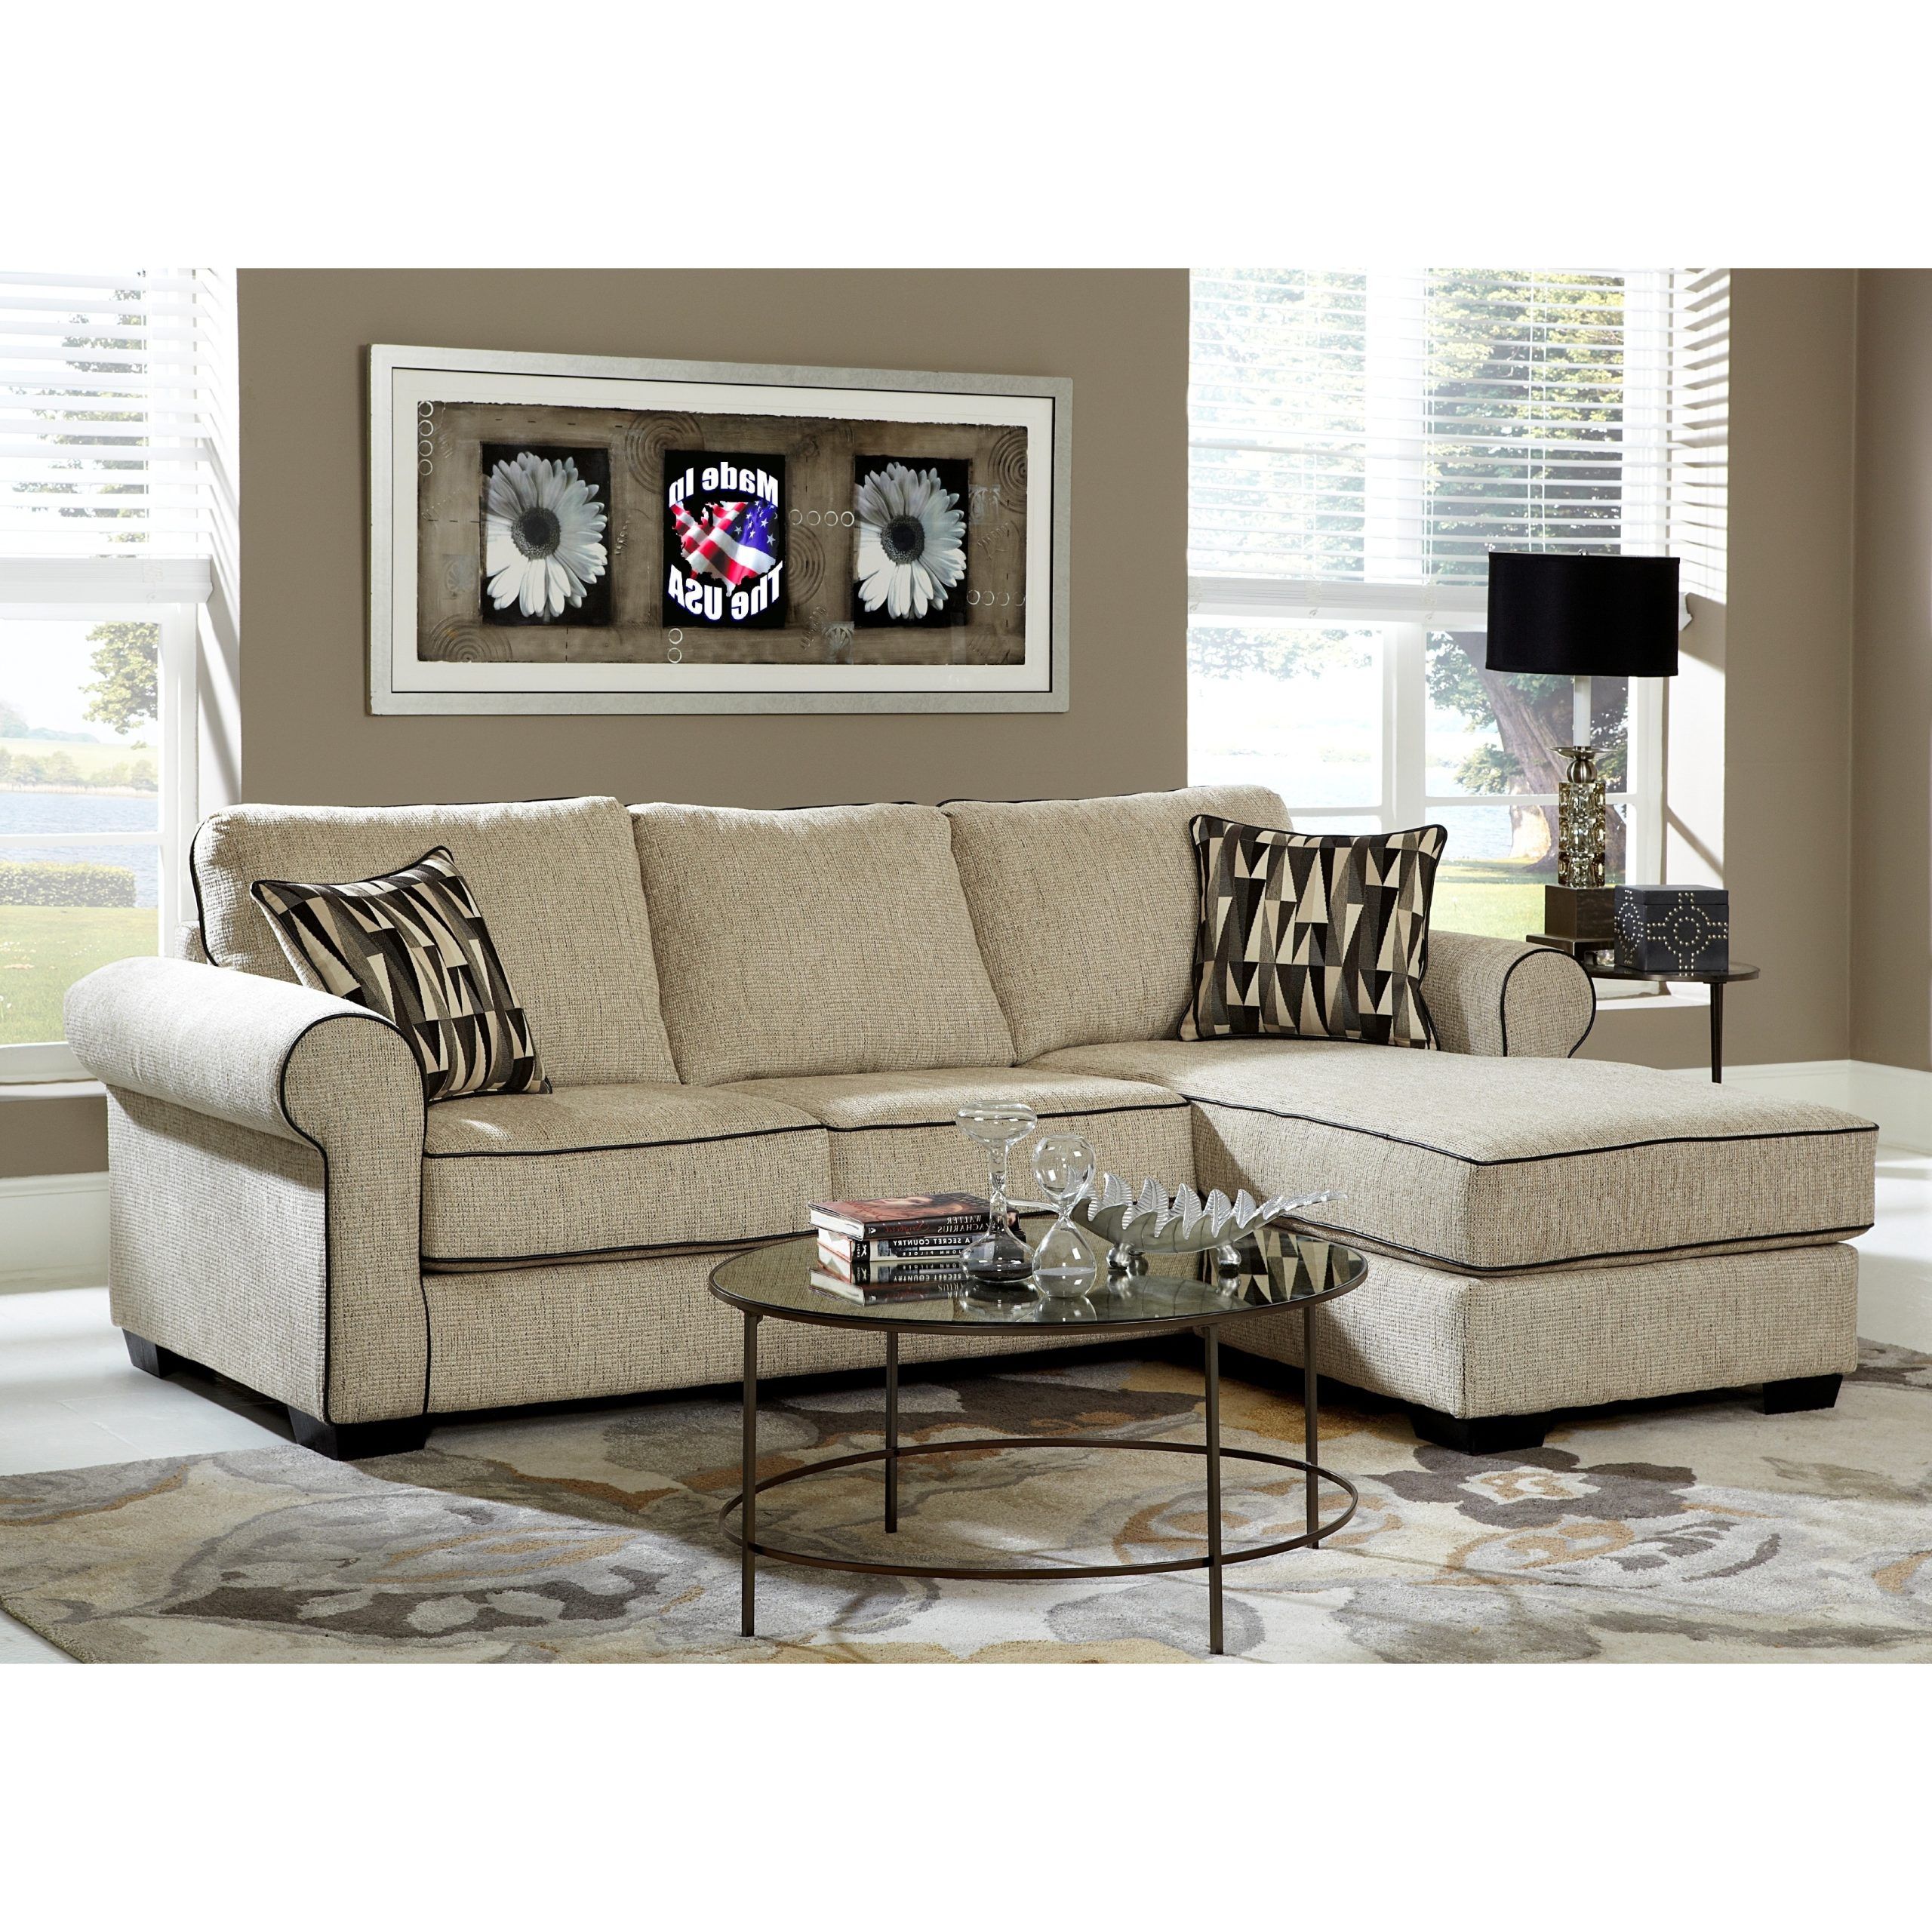 Chenille Sectional Sofas Within Preferred Shop Cream Chenille Reversible Sofa Chaise Sectional – Free Shipping (View 7 of 15)